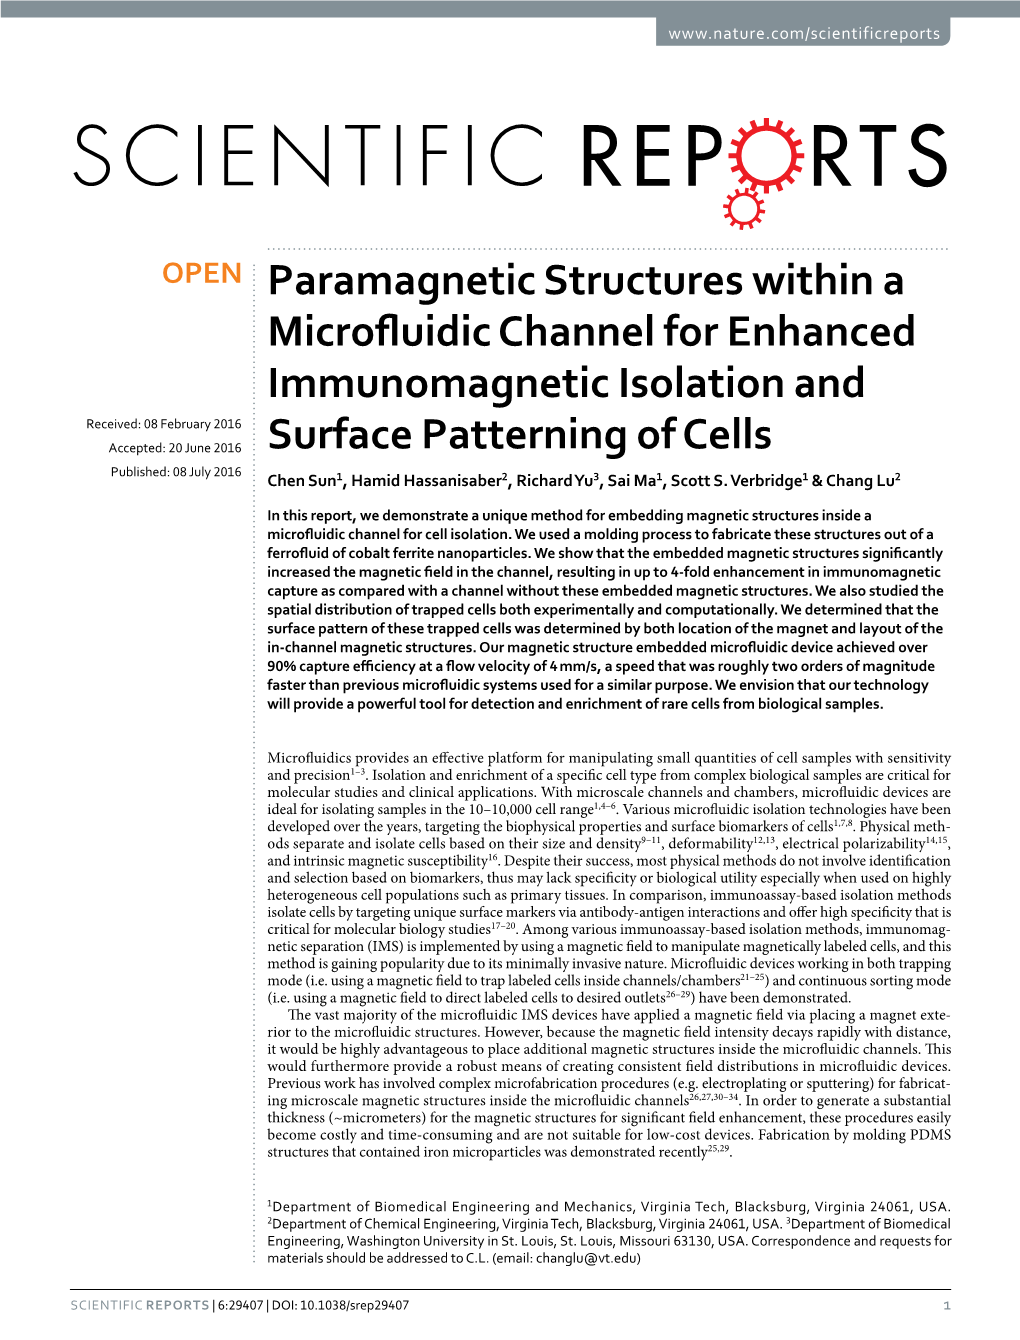 Paramagnetic Structures Within a Microfluidic Channel for Enhanced Immunomagnetic Isolation and Surface Patterning of Cells